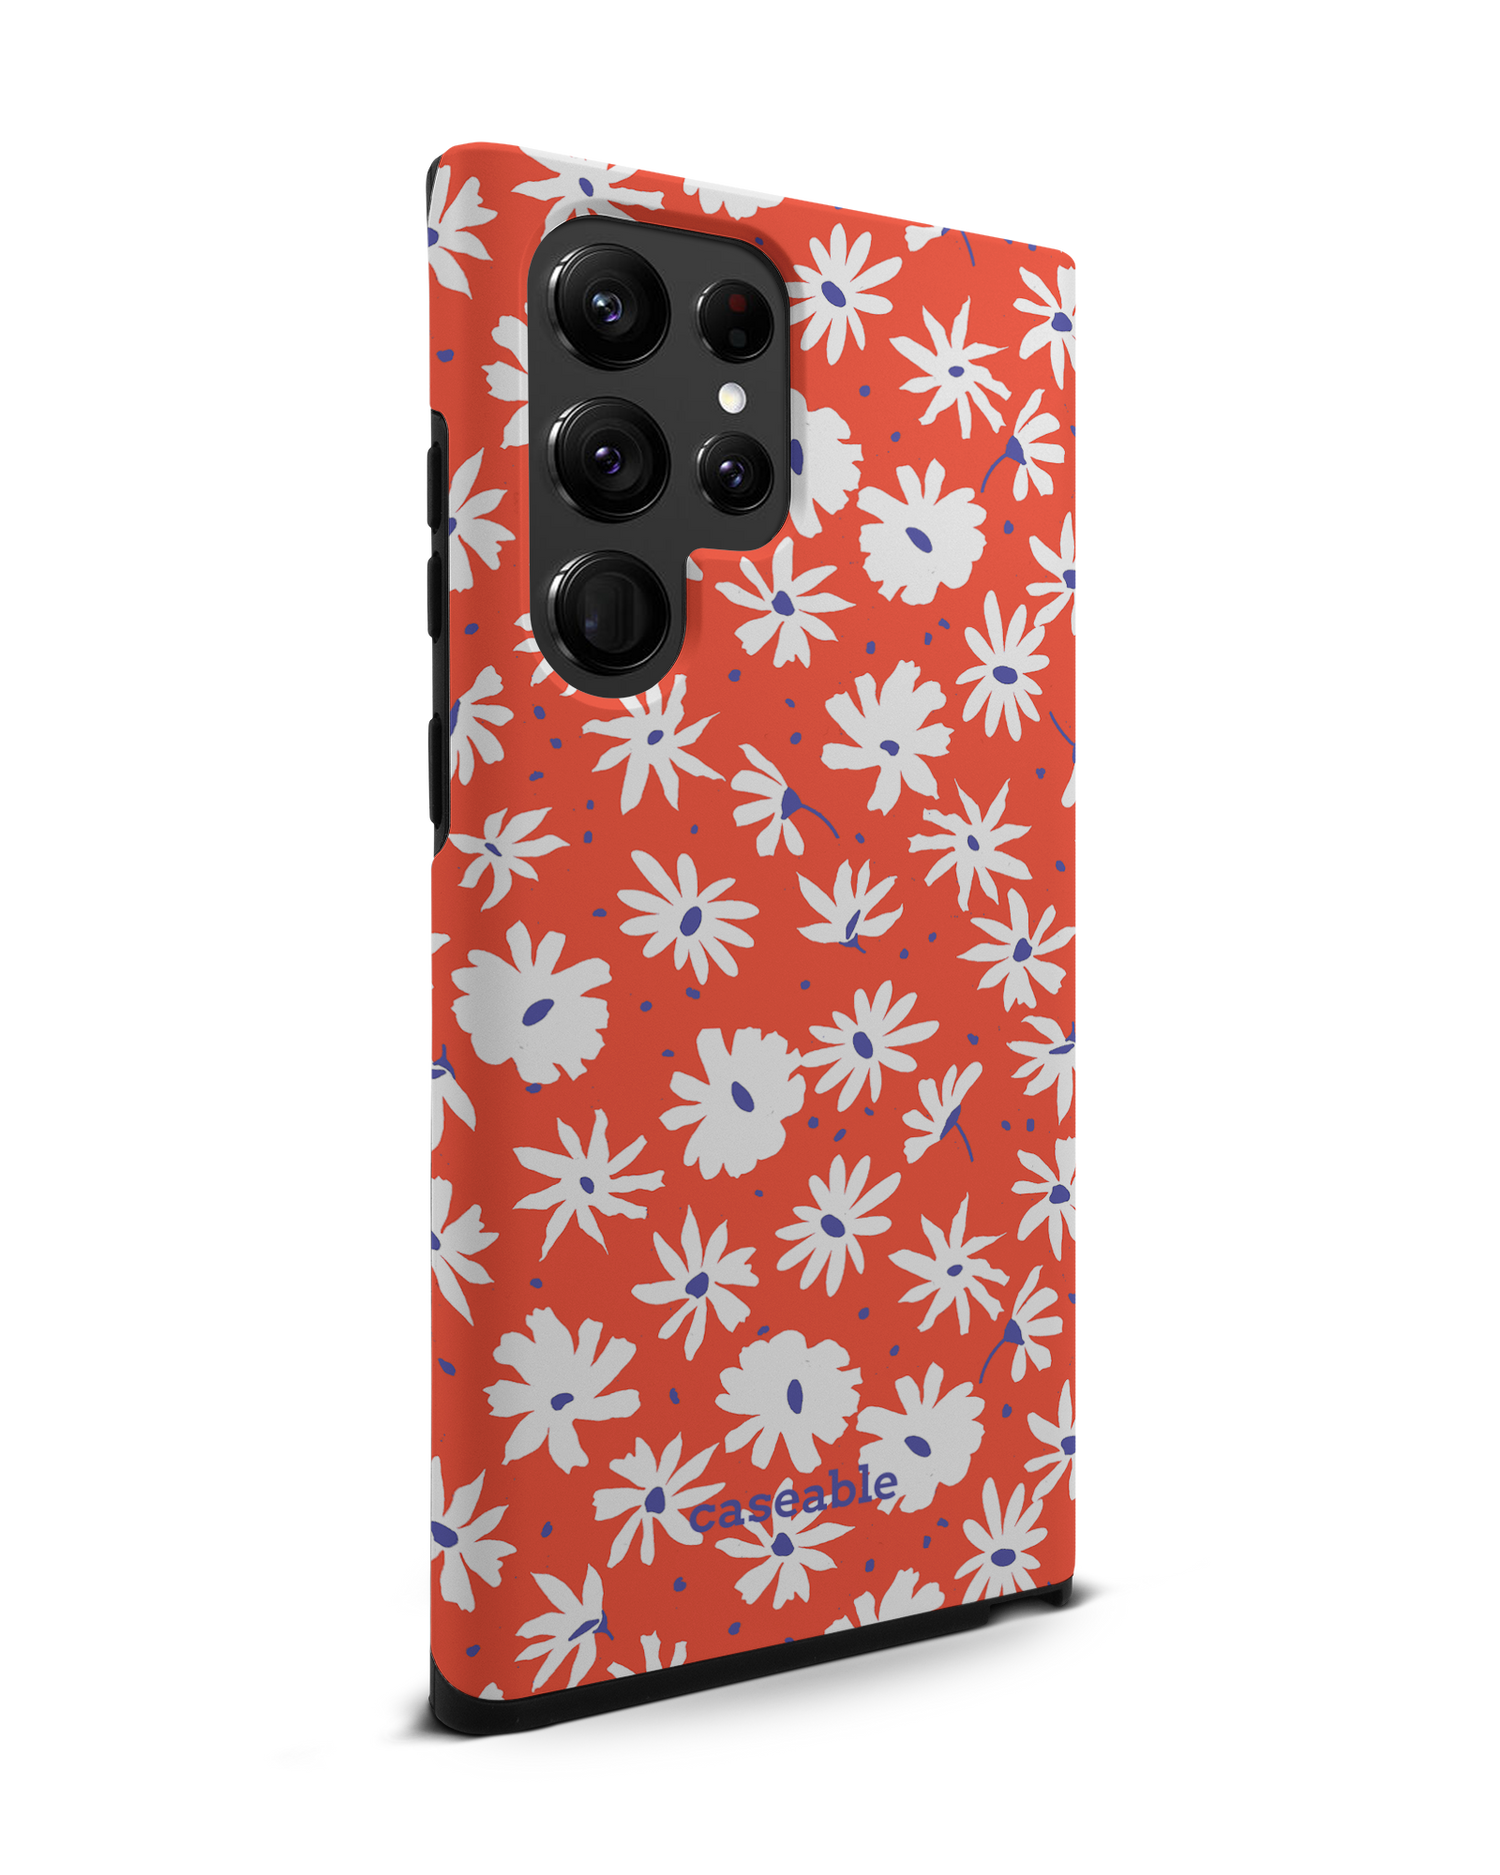 Retro Daisy Premium Phone Case Samsung Galaxy S22 Ultra 5G: View from the left side